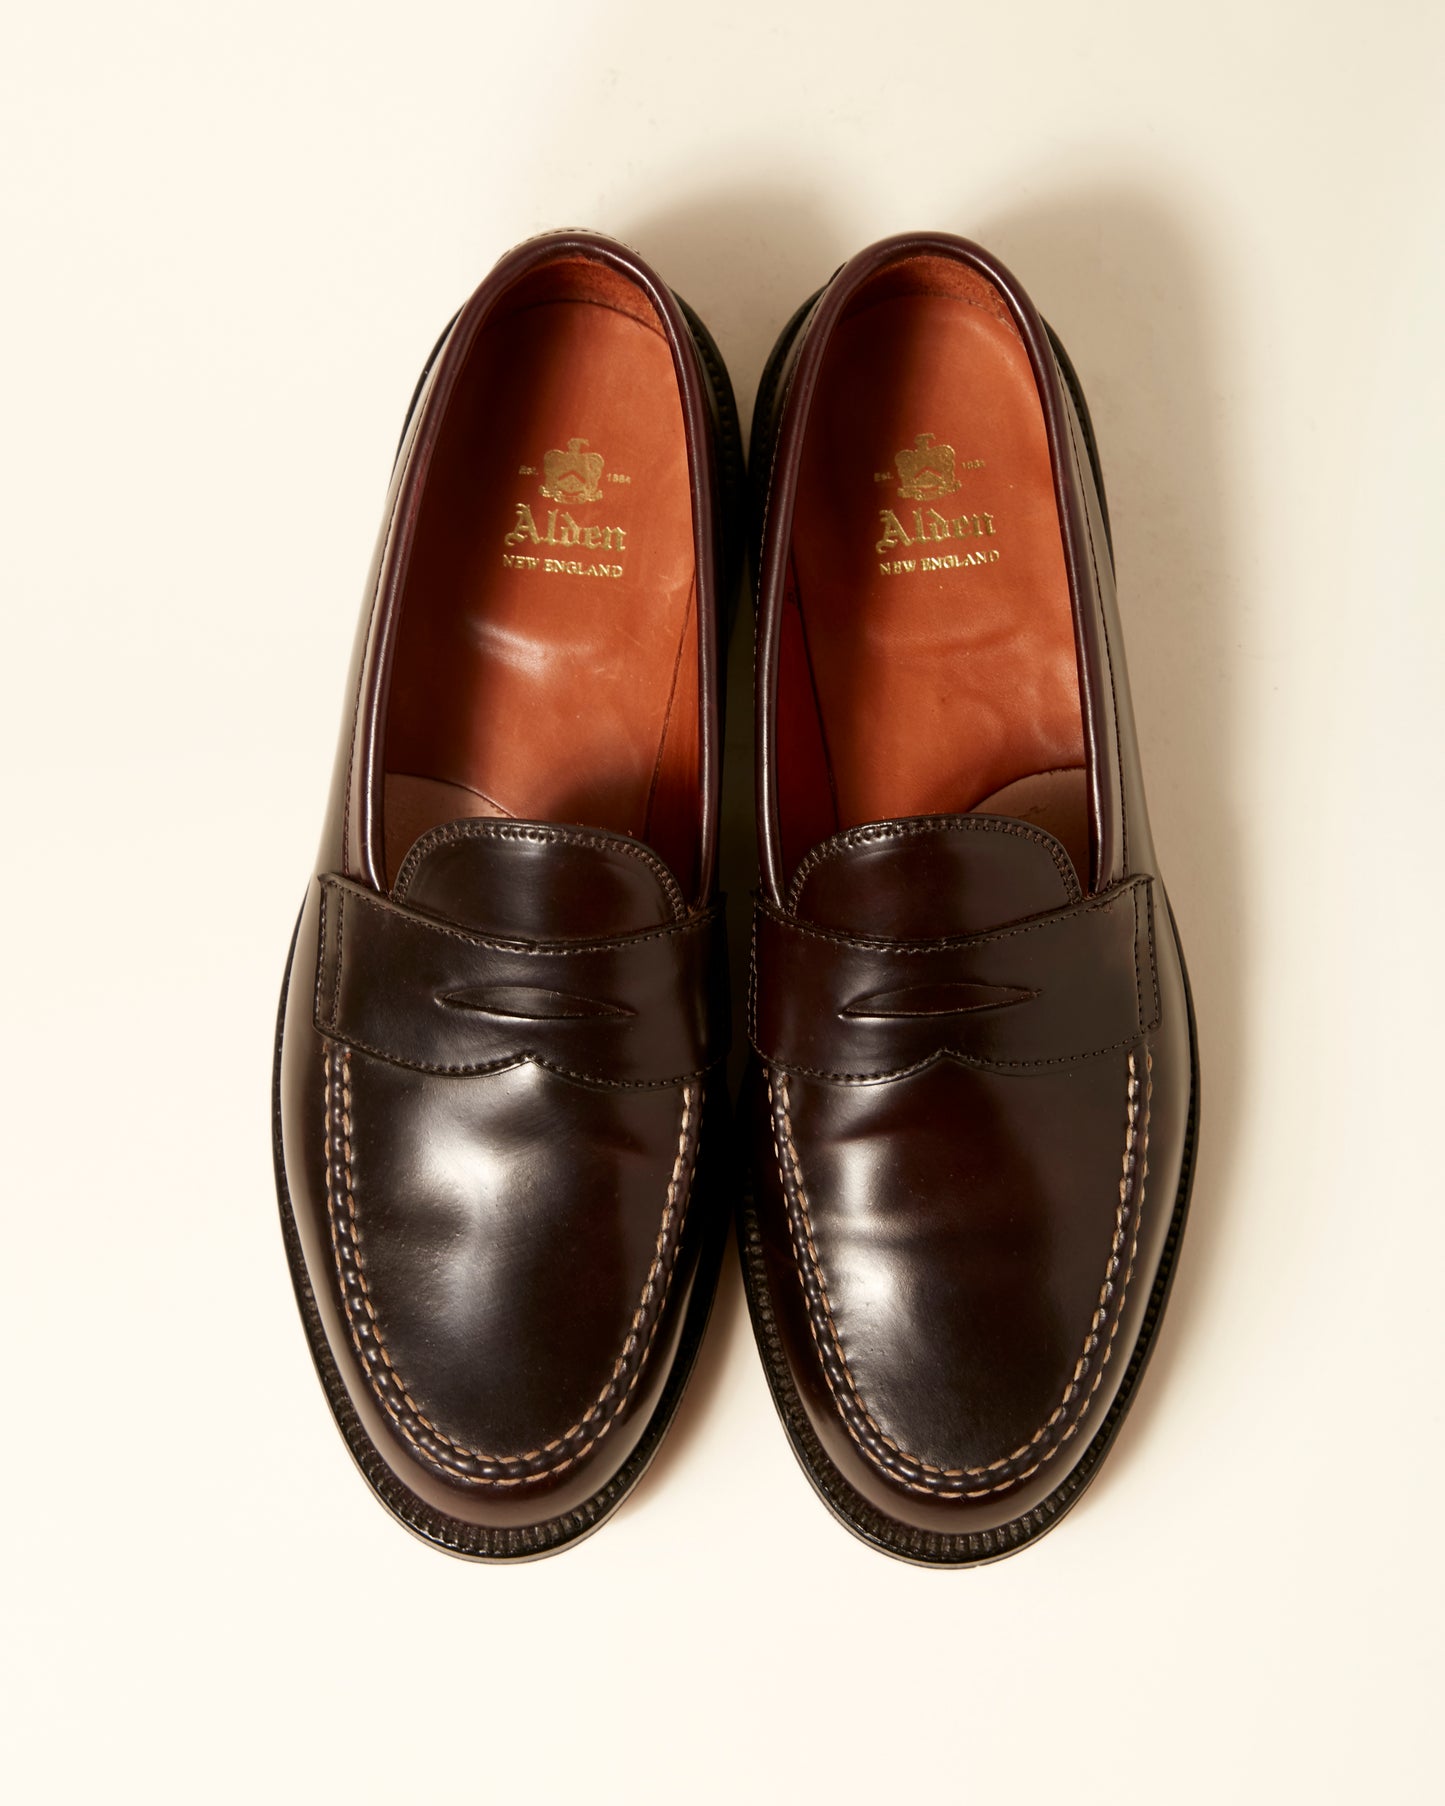 986 Color 8 Shell Cordovan Leisure Handsewn Loafer